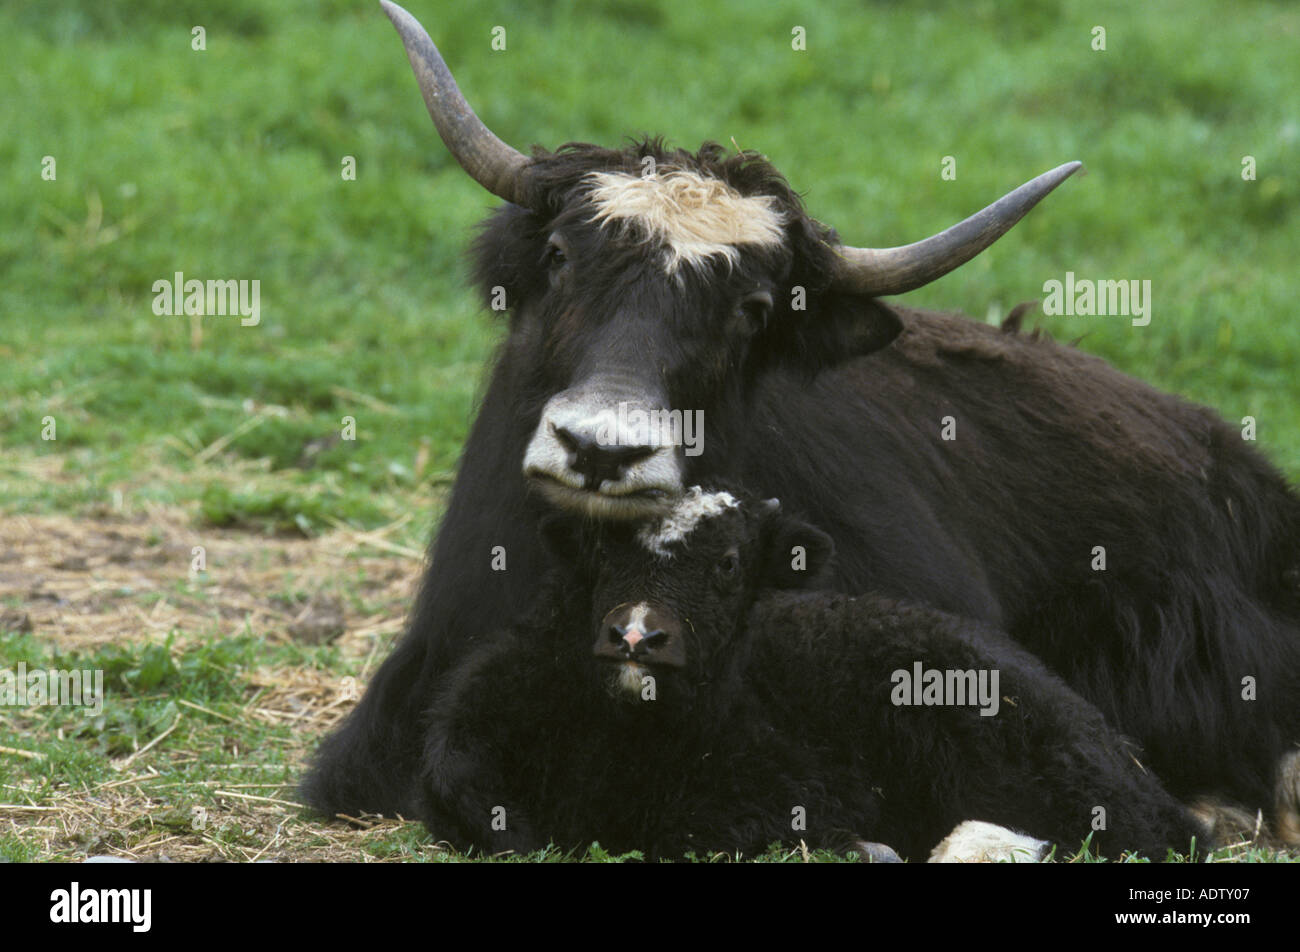 Yak Bos grunniens Mother and calf resting Stock Photo